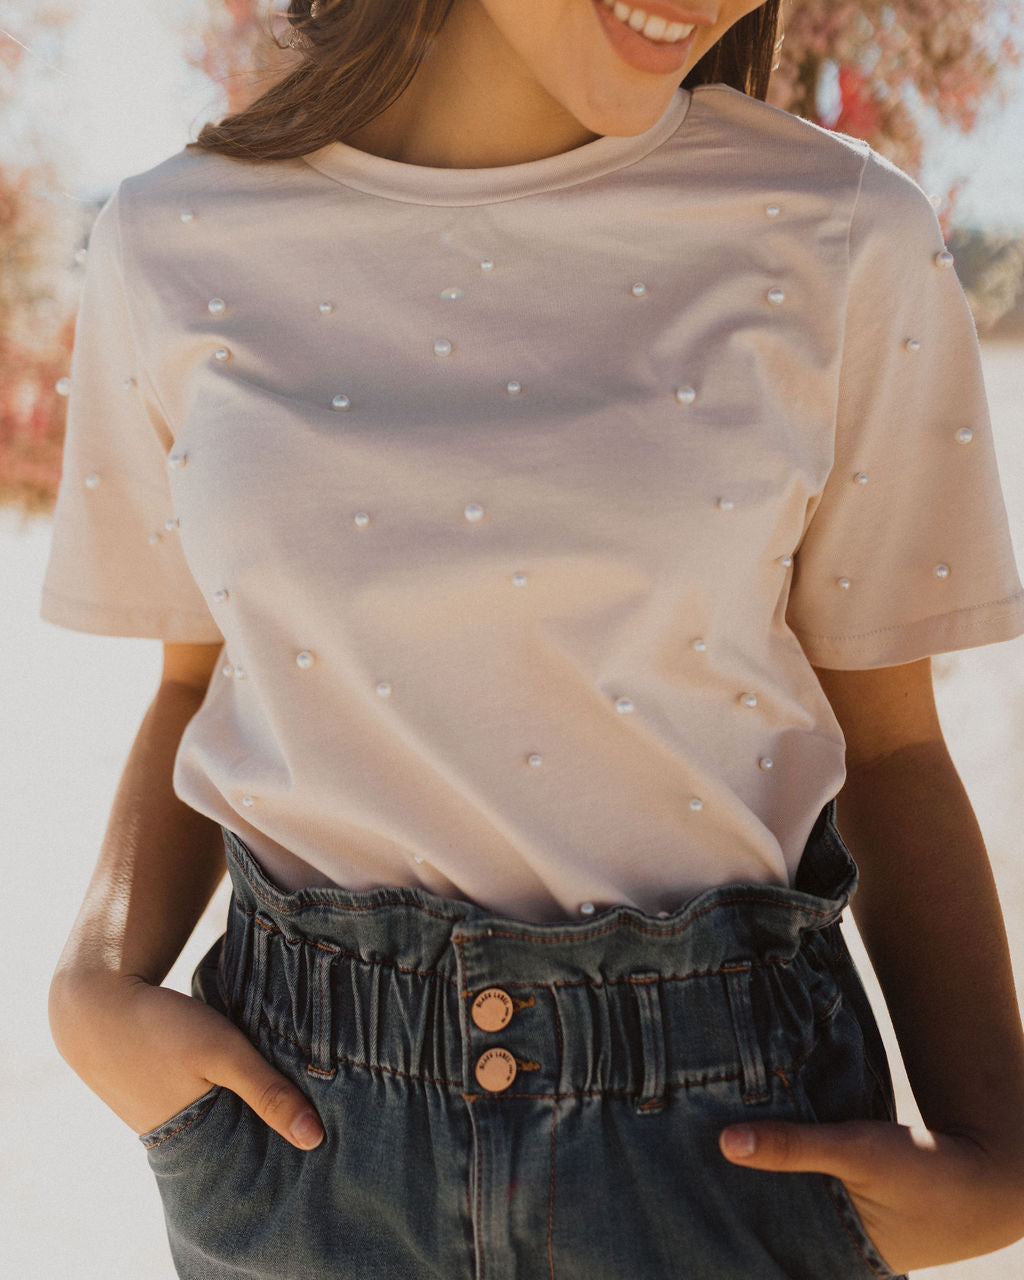 THE PRETTY IN PEARLS EMBELLISHED TOP IN BEIGE